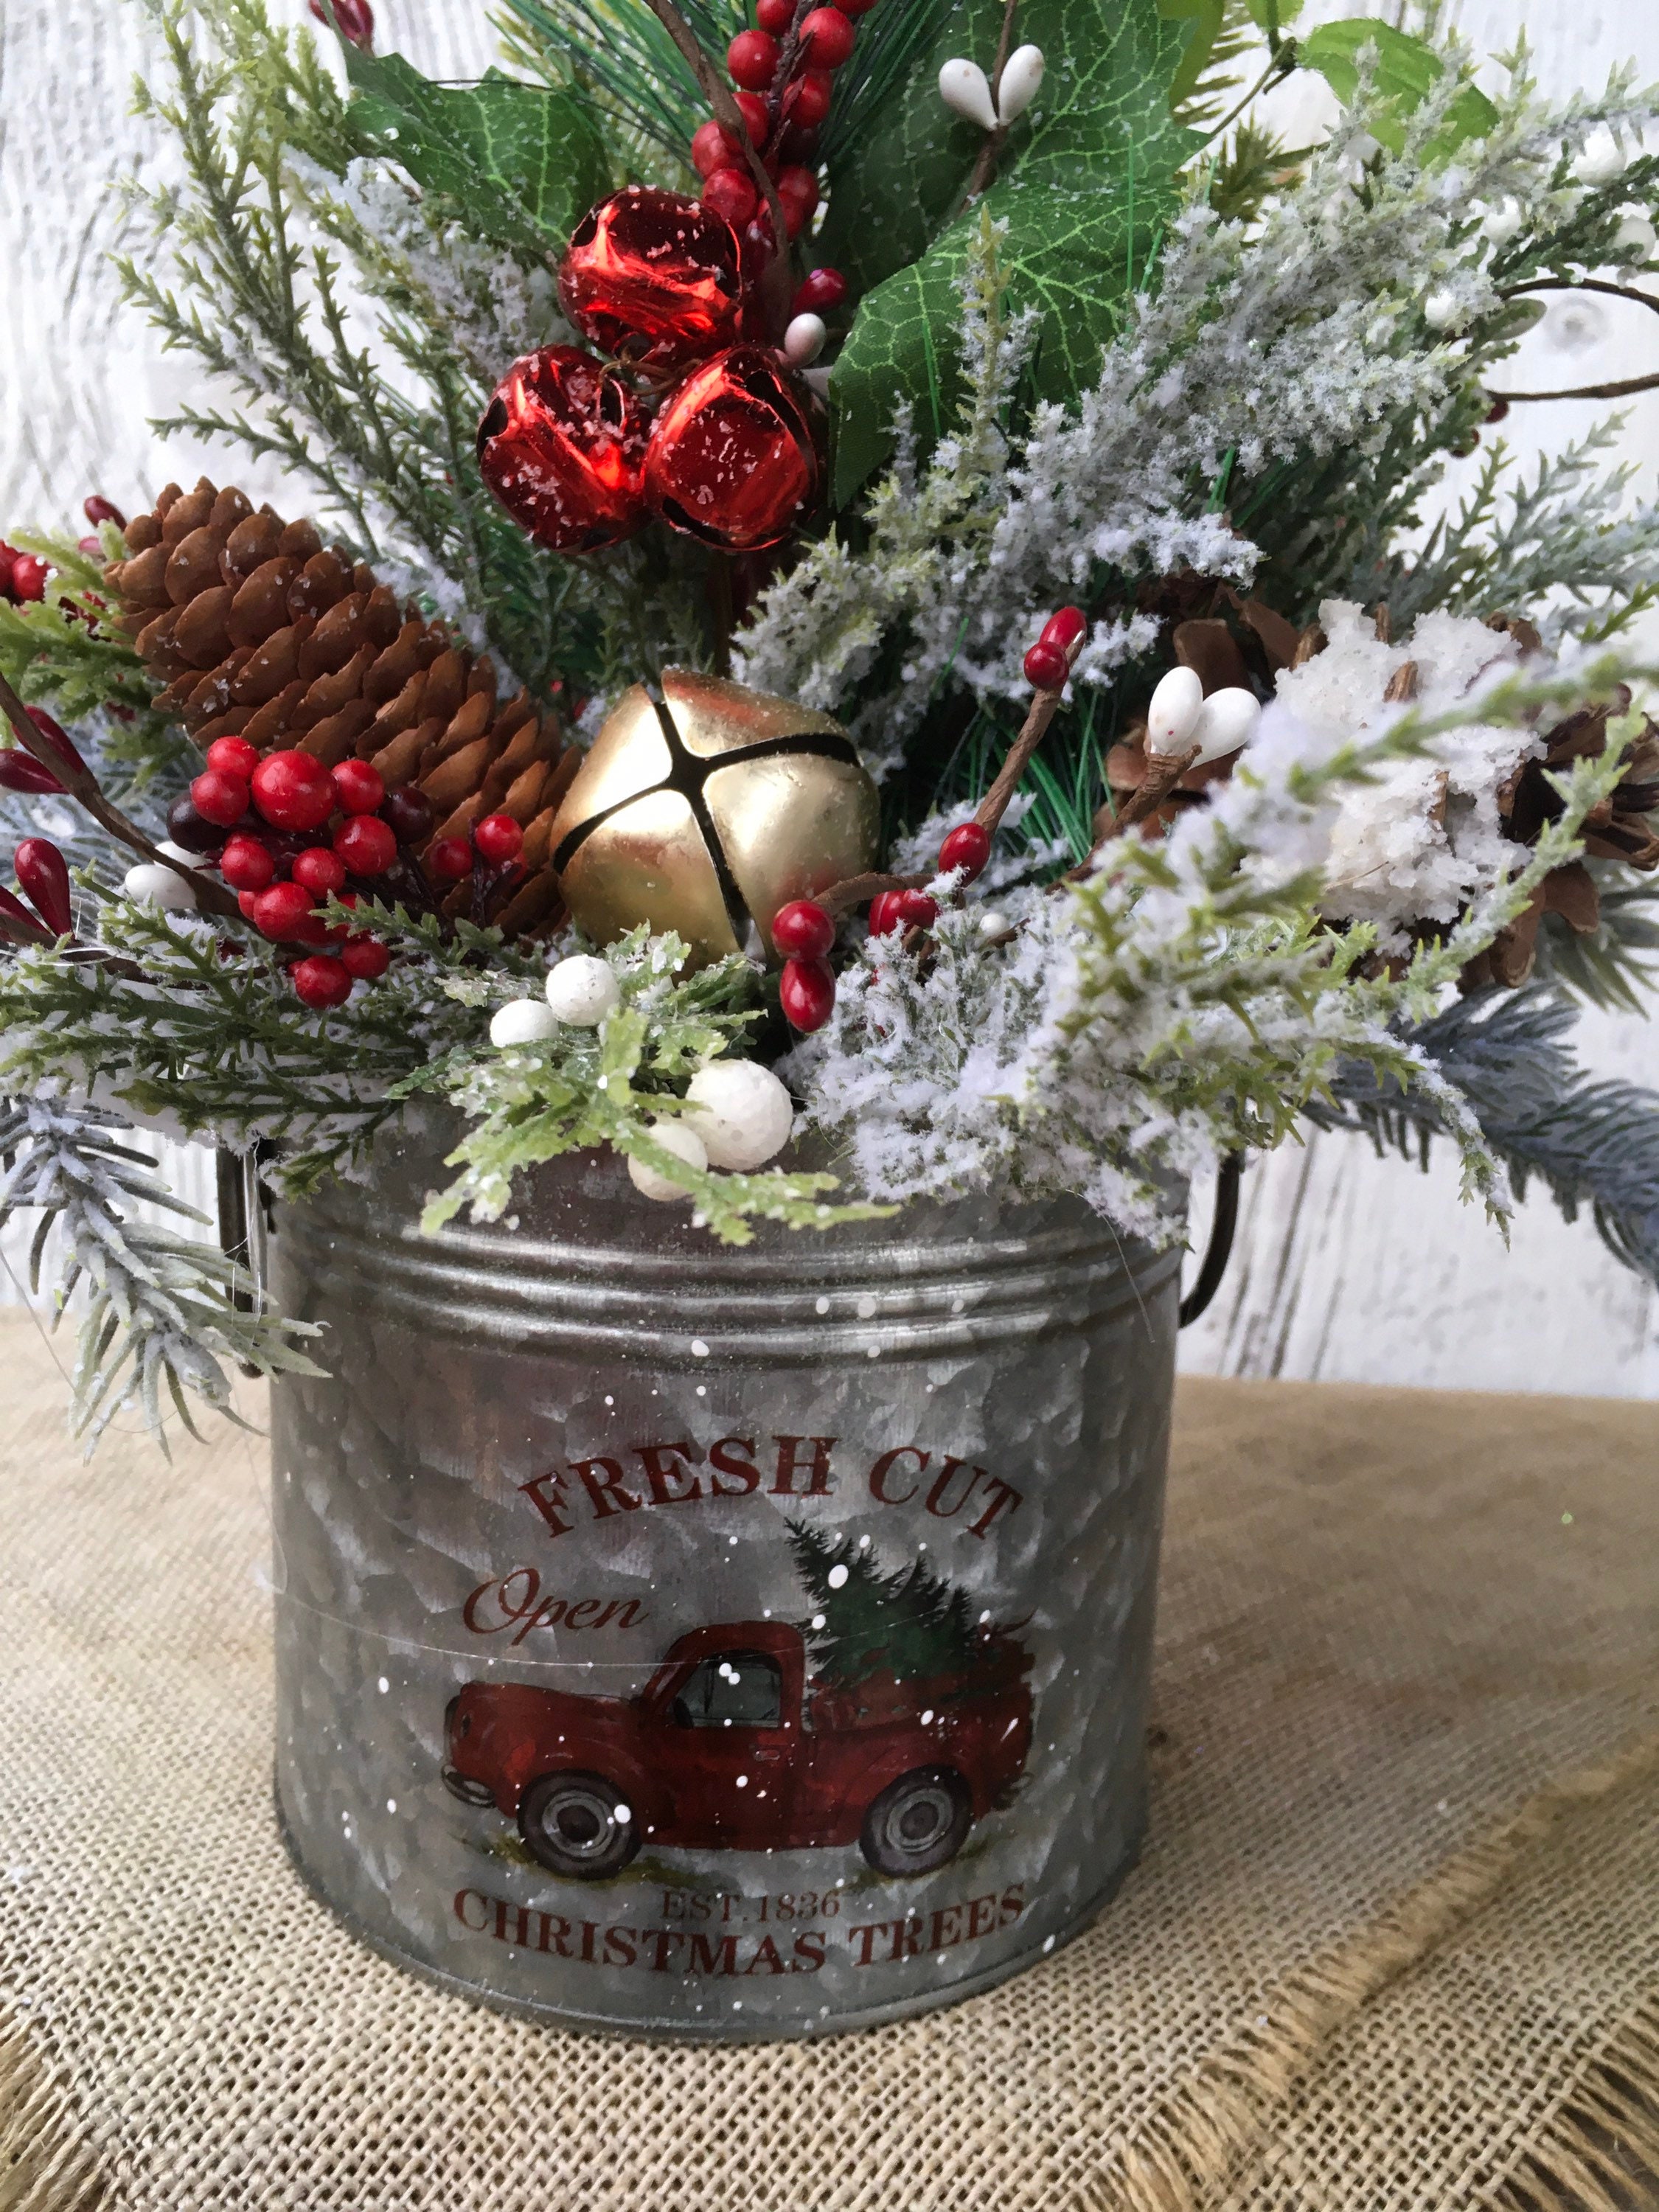 Old Red Truck Bringing Home the Tree Christmas Centerpiece Christmas Arrangement in Galvanized Tin Fresh Cut Christmas Trees Decor